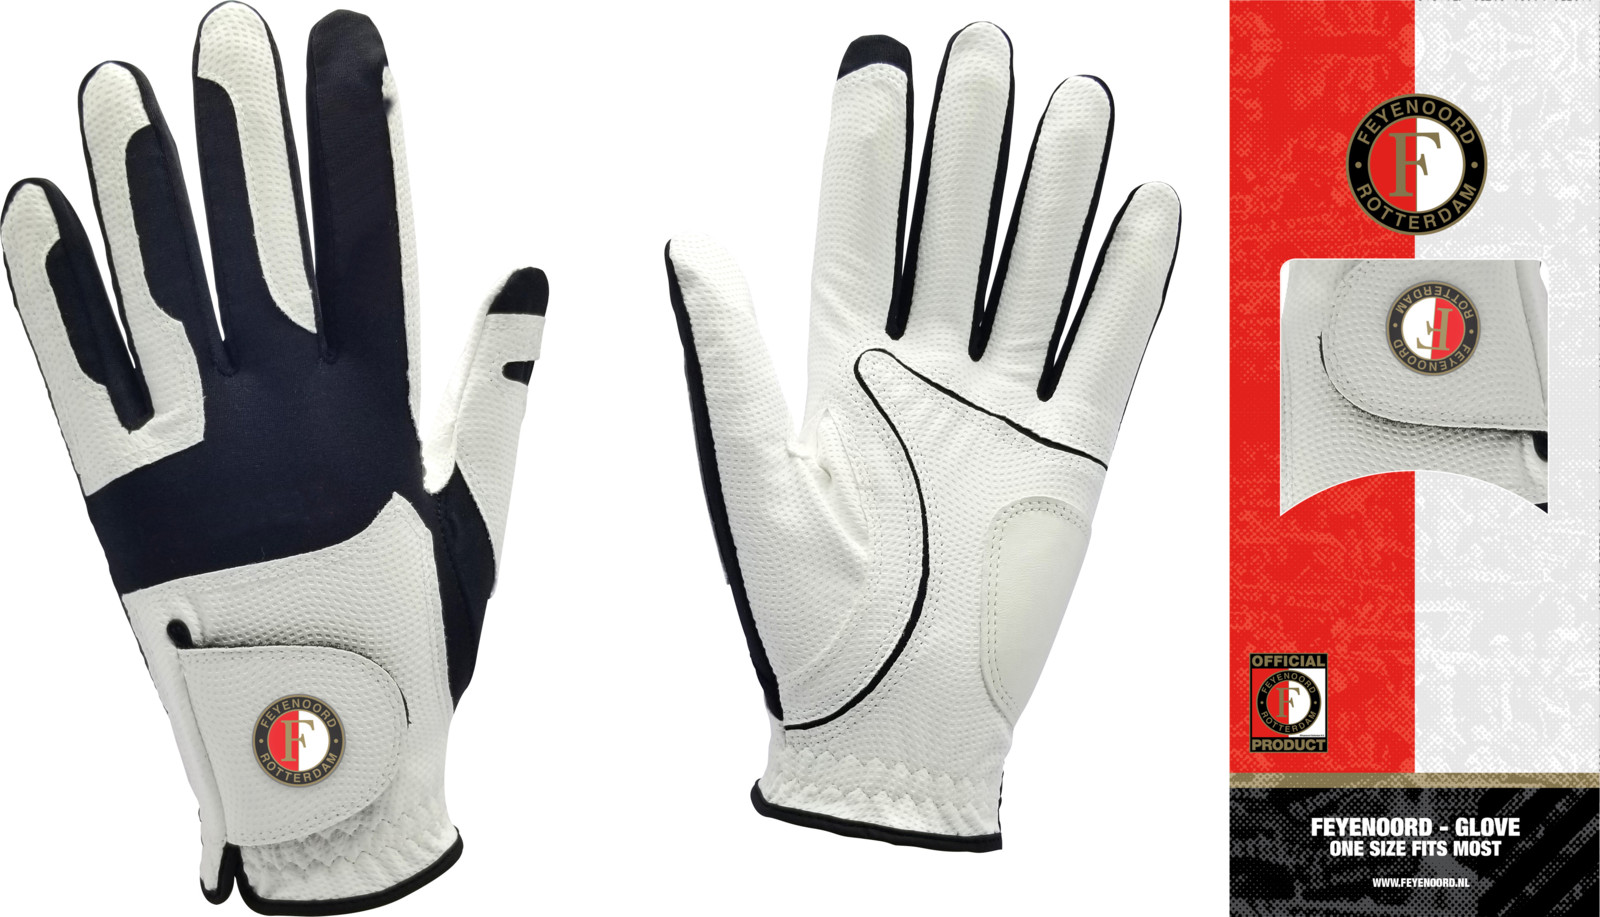 Feyenoord | Trufit Mens Glove | One Size Fits All | Limited Edition